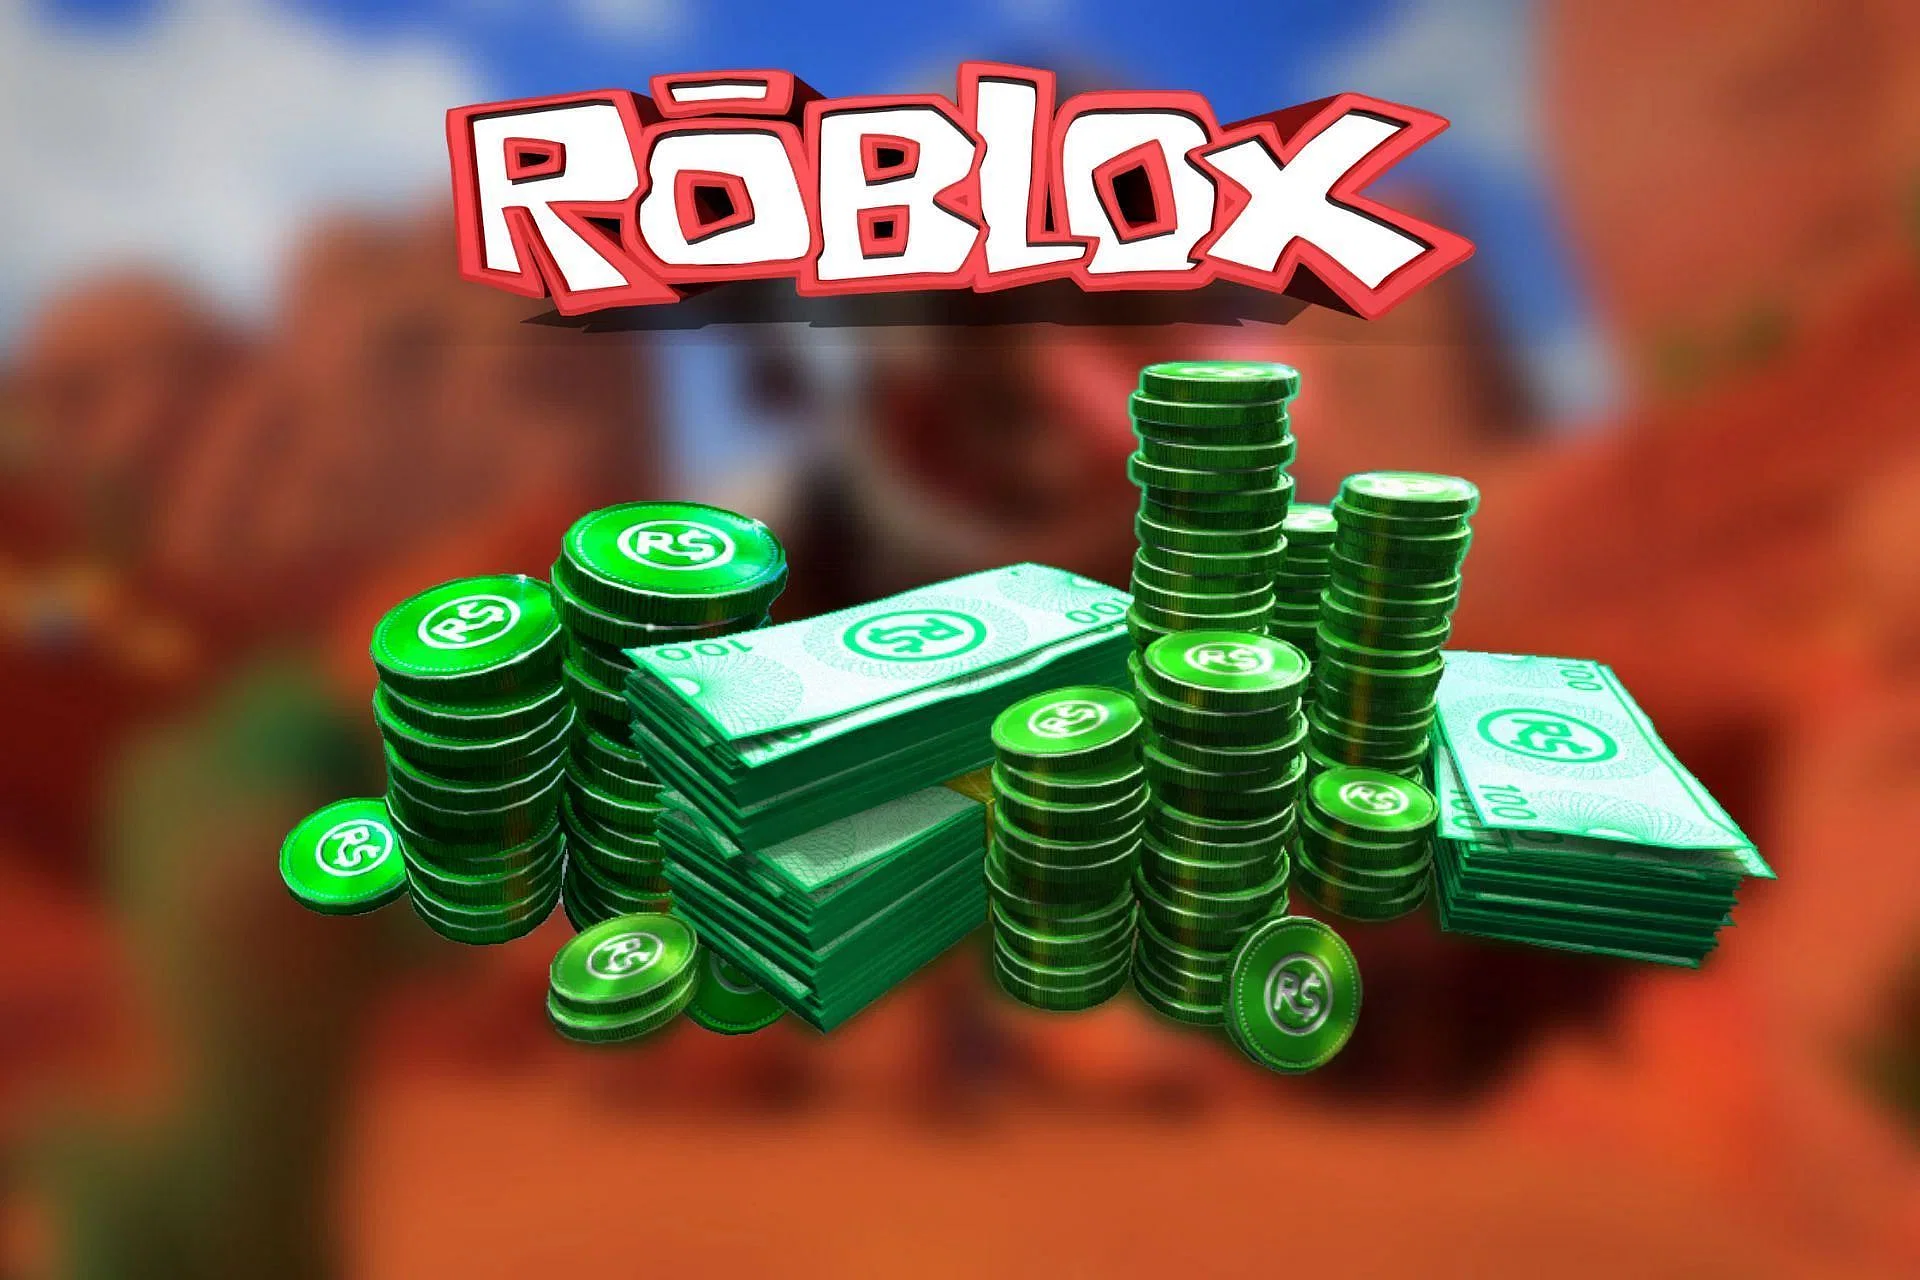 Does Robux Cost Money?